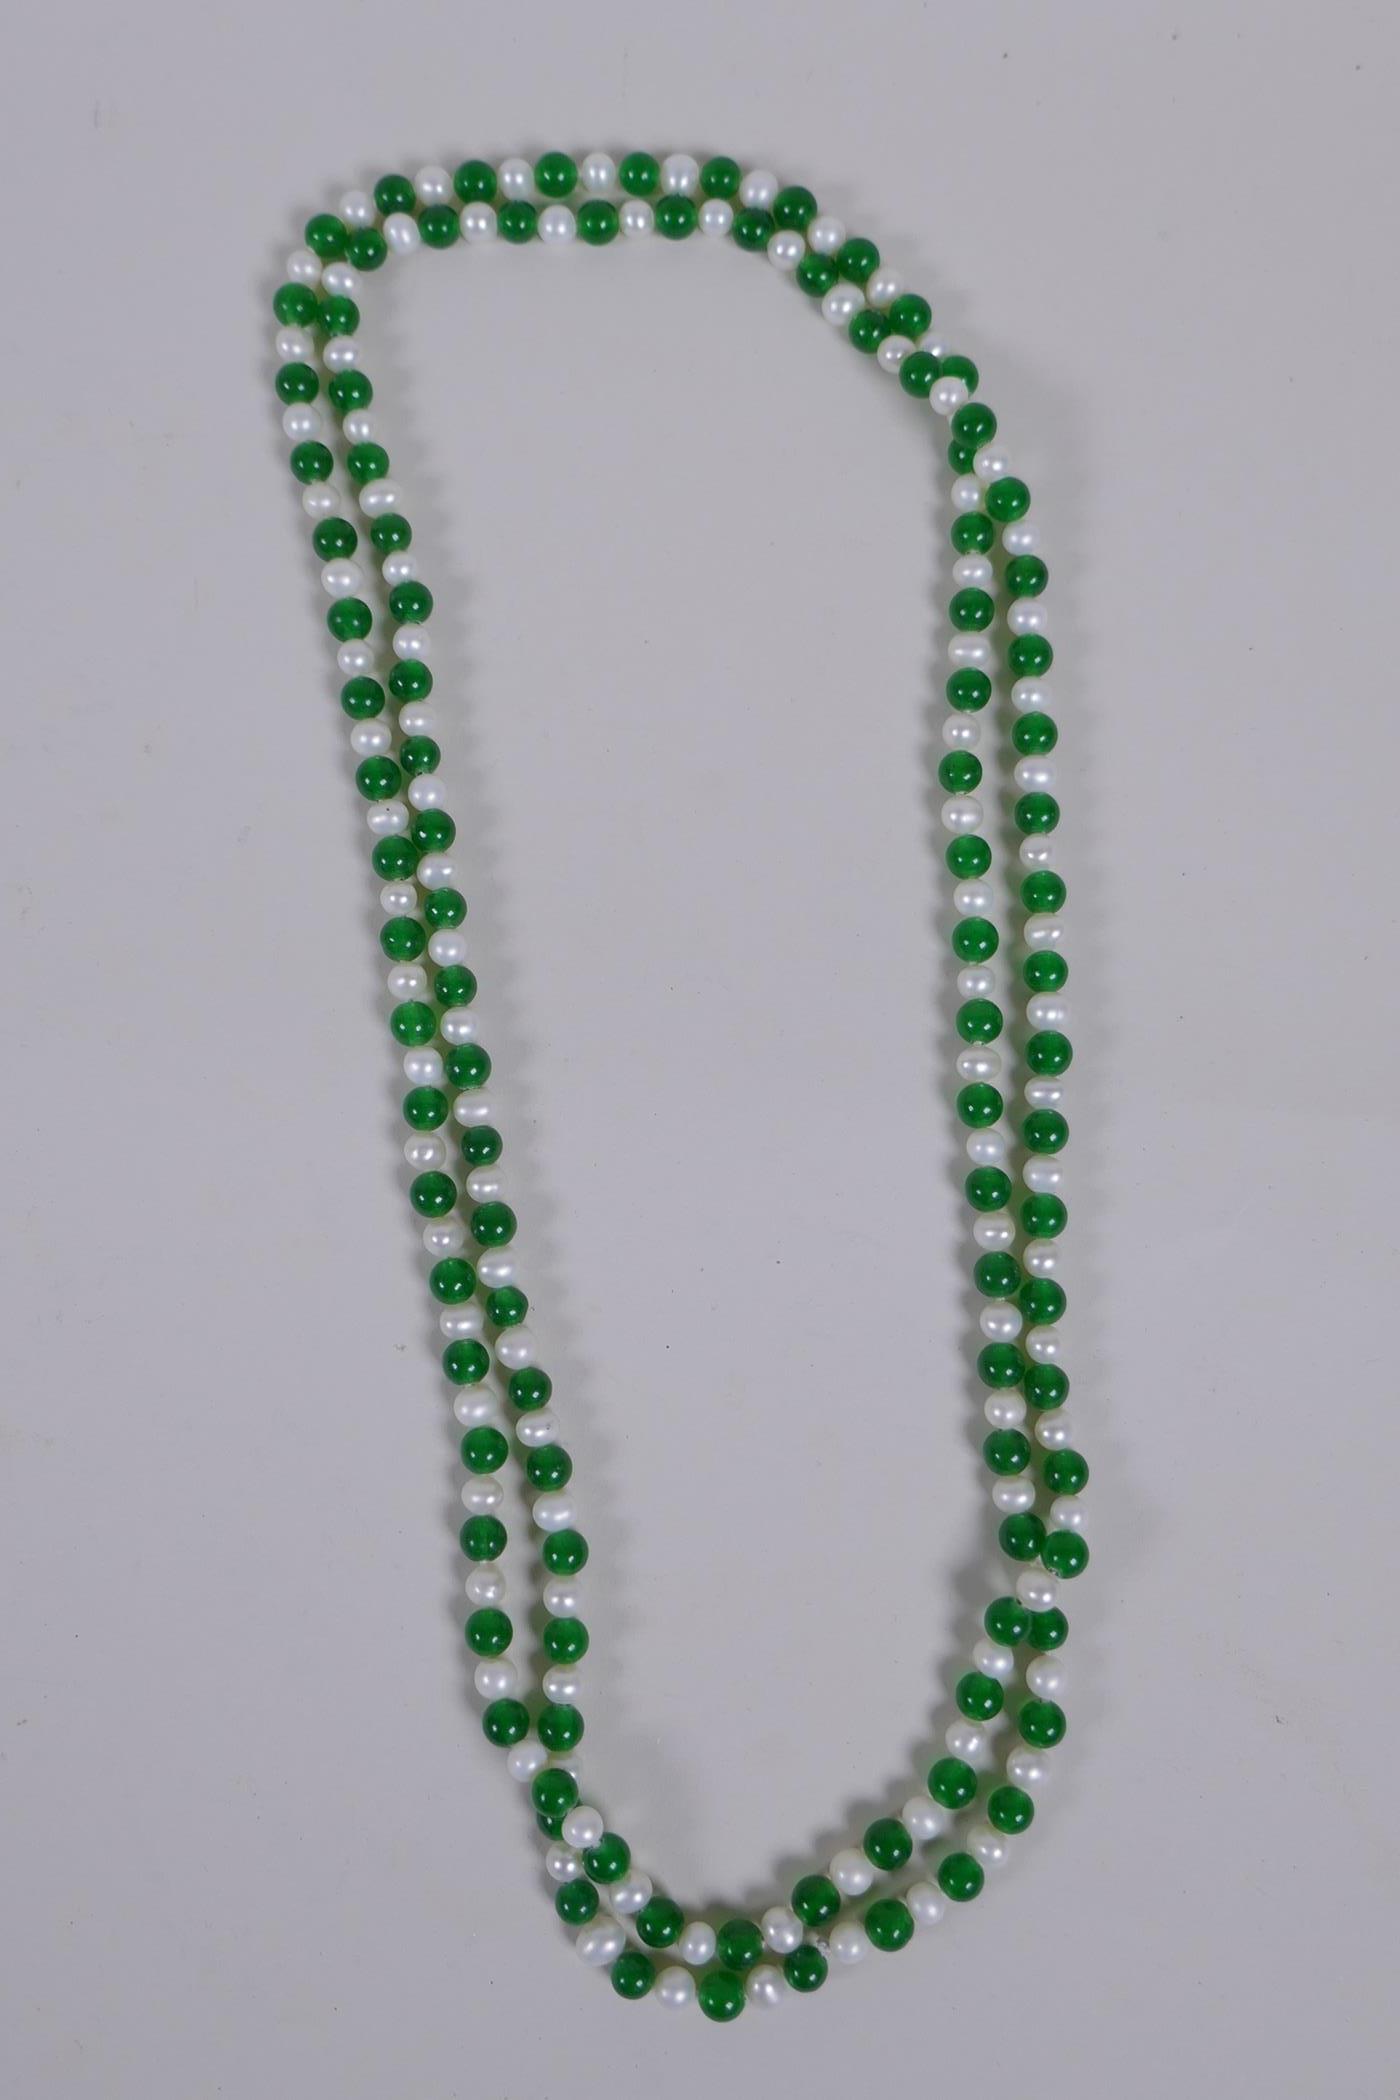 A green jade and pearl bead necklace, 120cm long